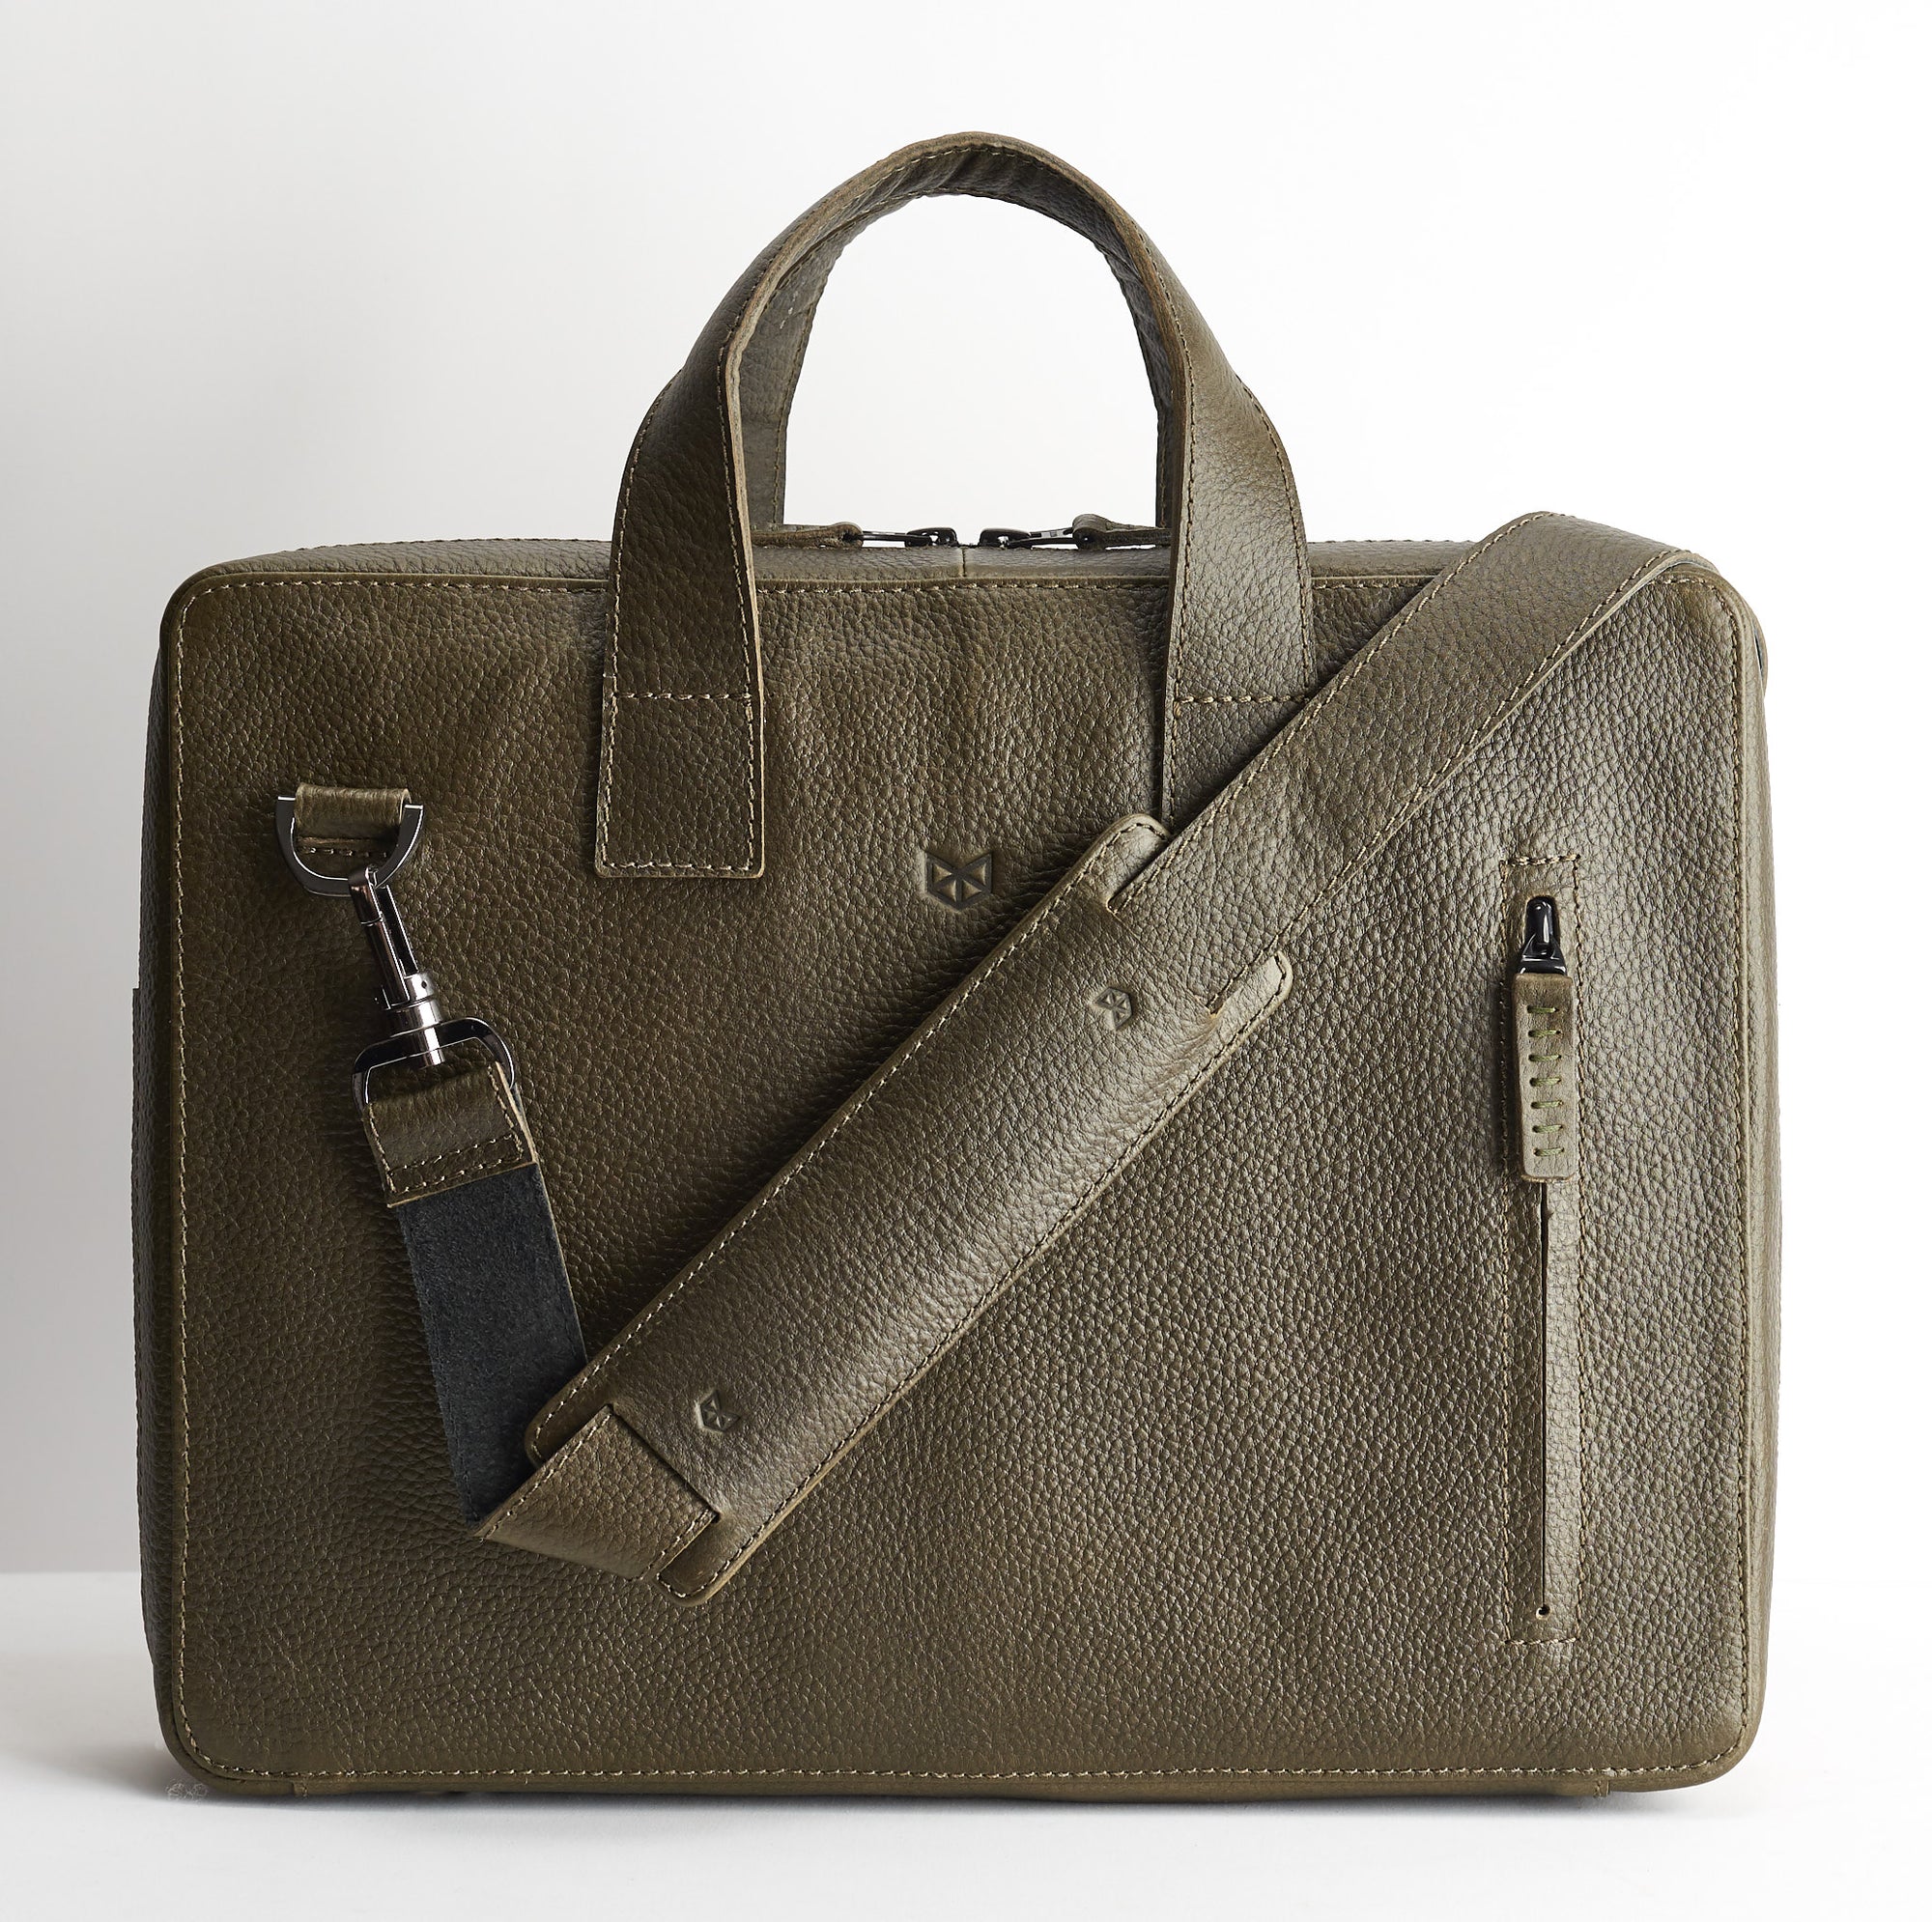 Extra padded shoulder strap.  Green leather briefcase for men. Office style mens workbag